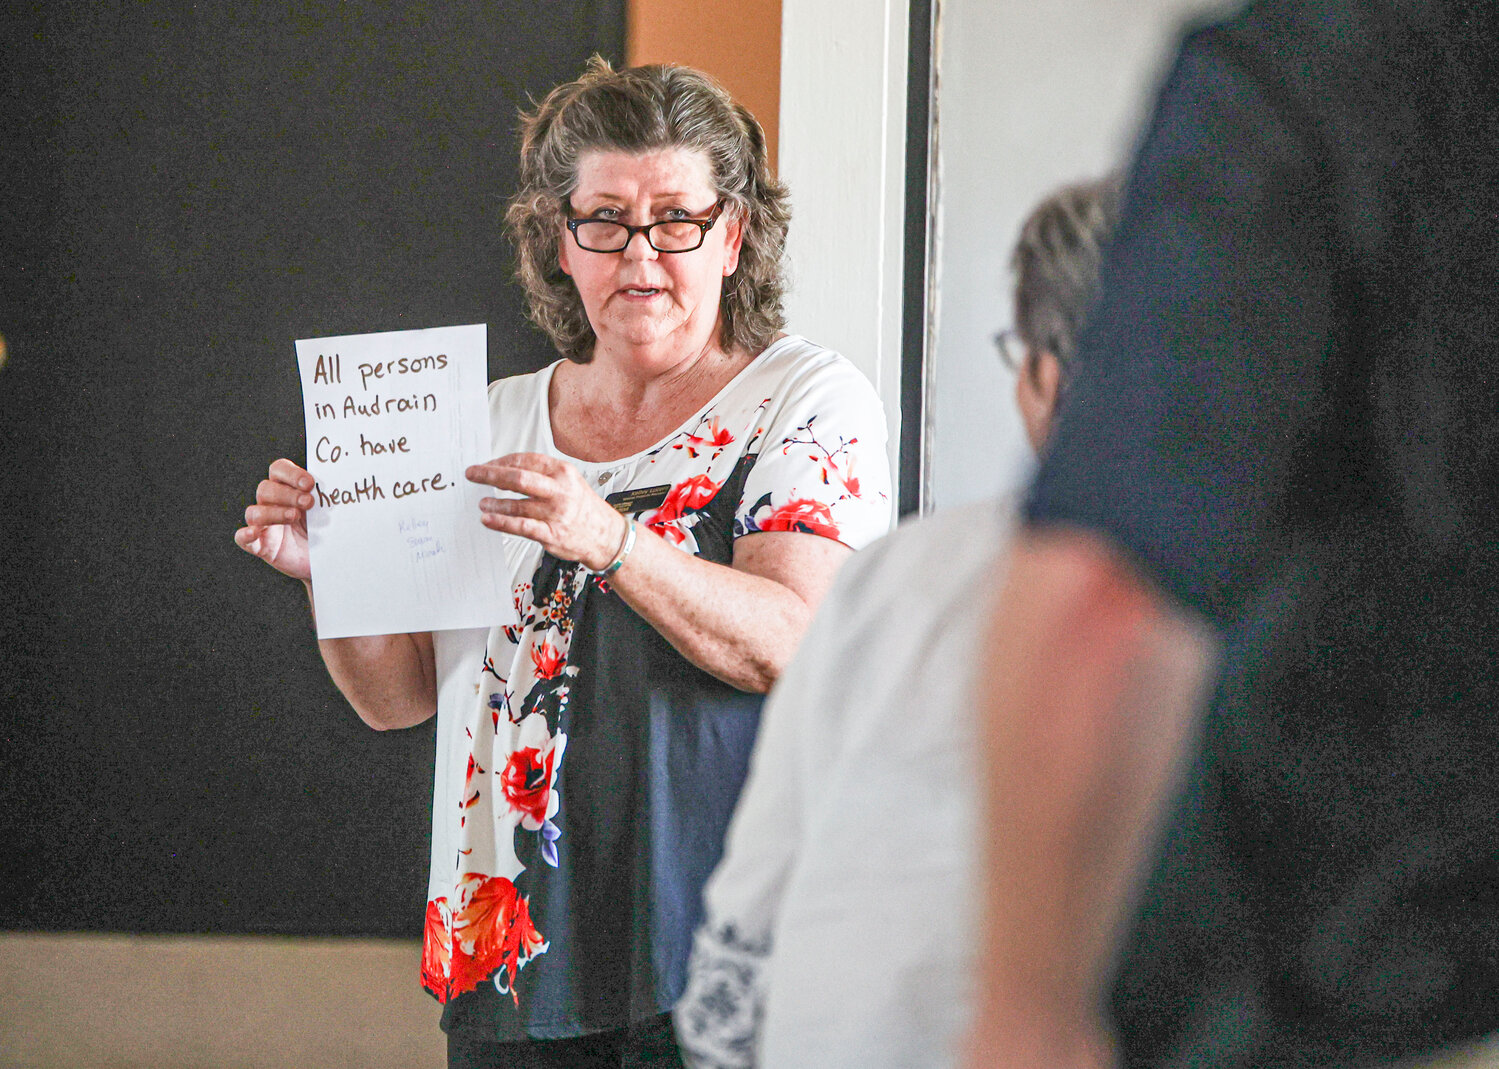 Kelley Lucero with Central Missouri Community Action holds up a note during a meeting in June.